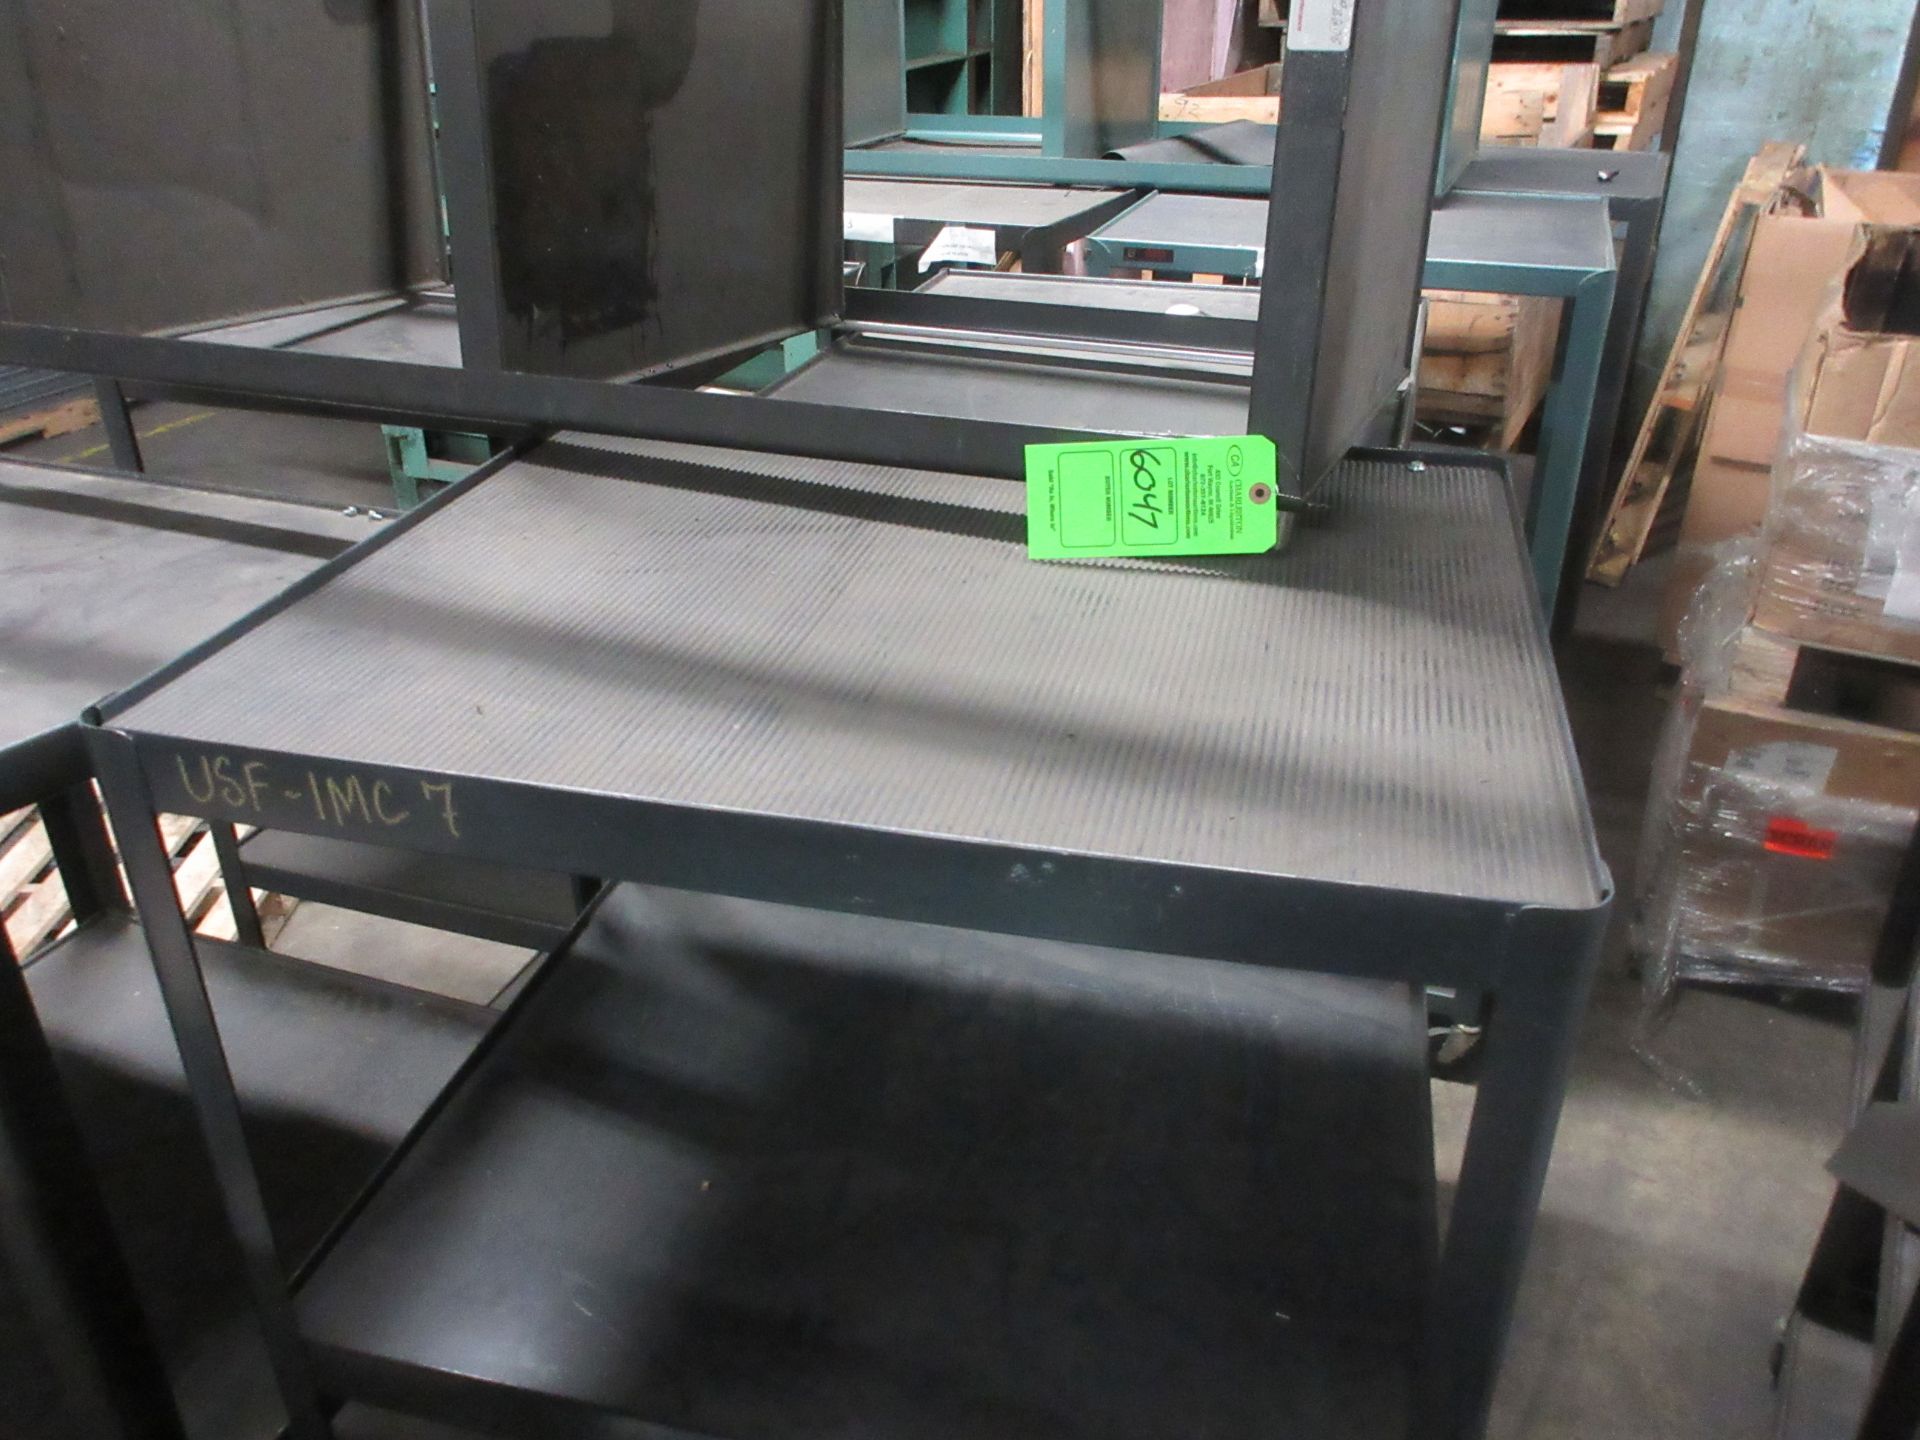 Set of five “teachers carts” Sold as is Handling fees $0-$10 (located at 219 Murray Street, Fort